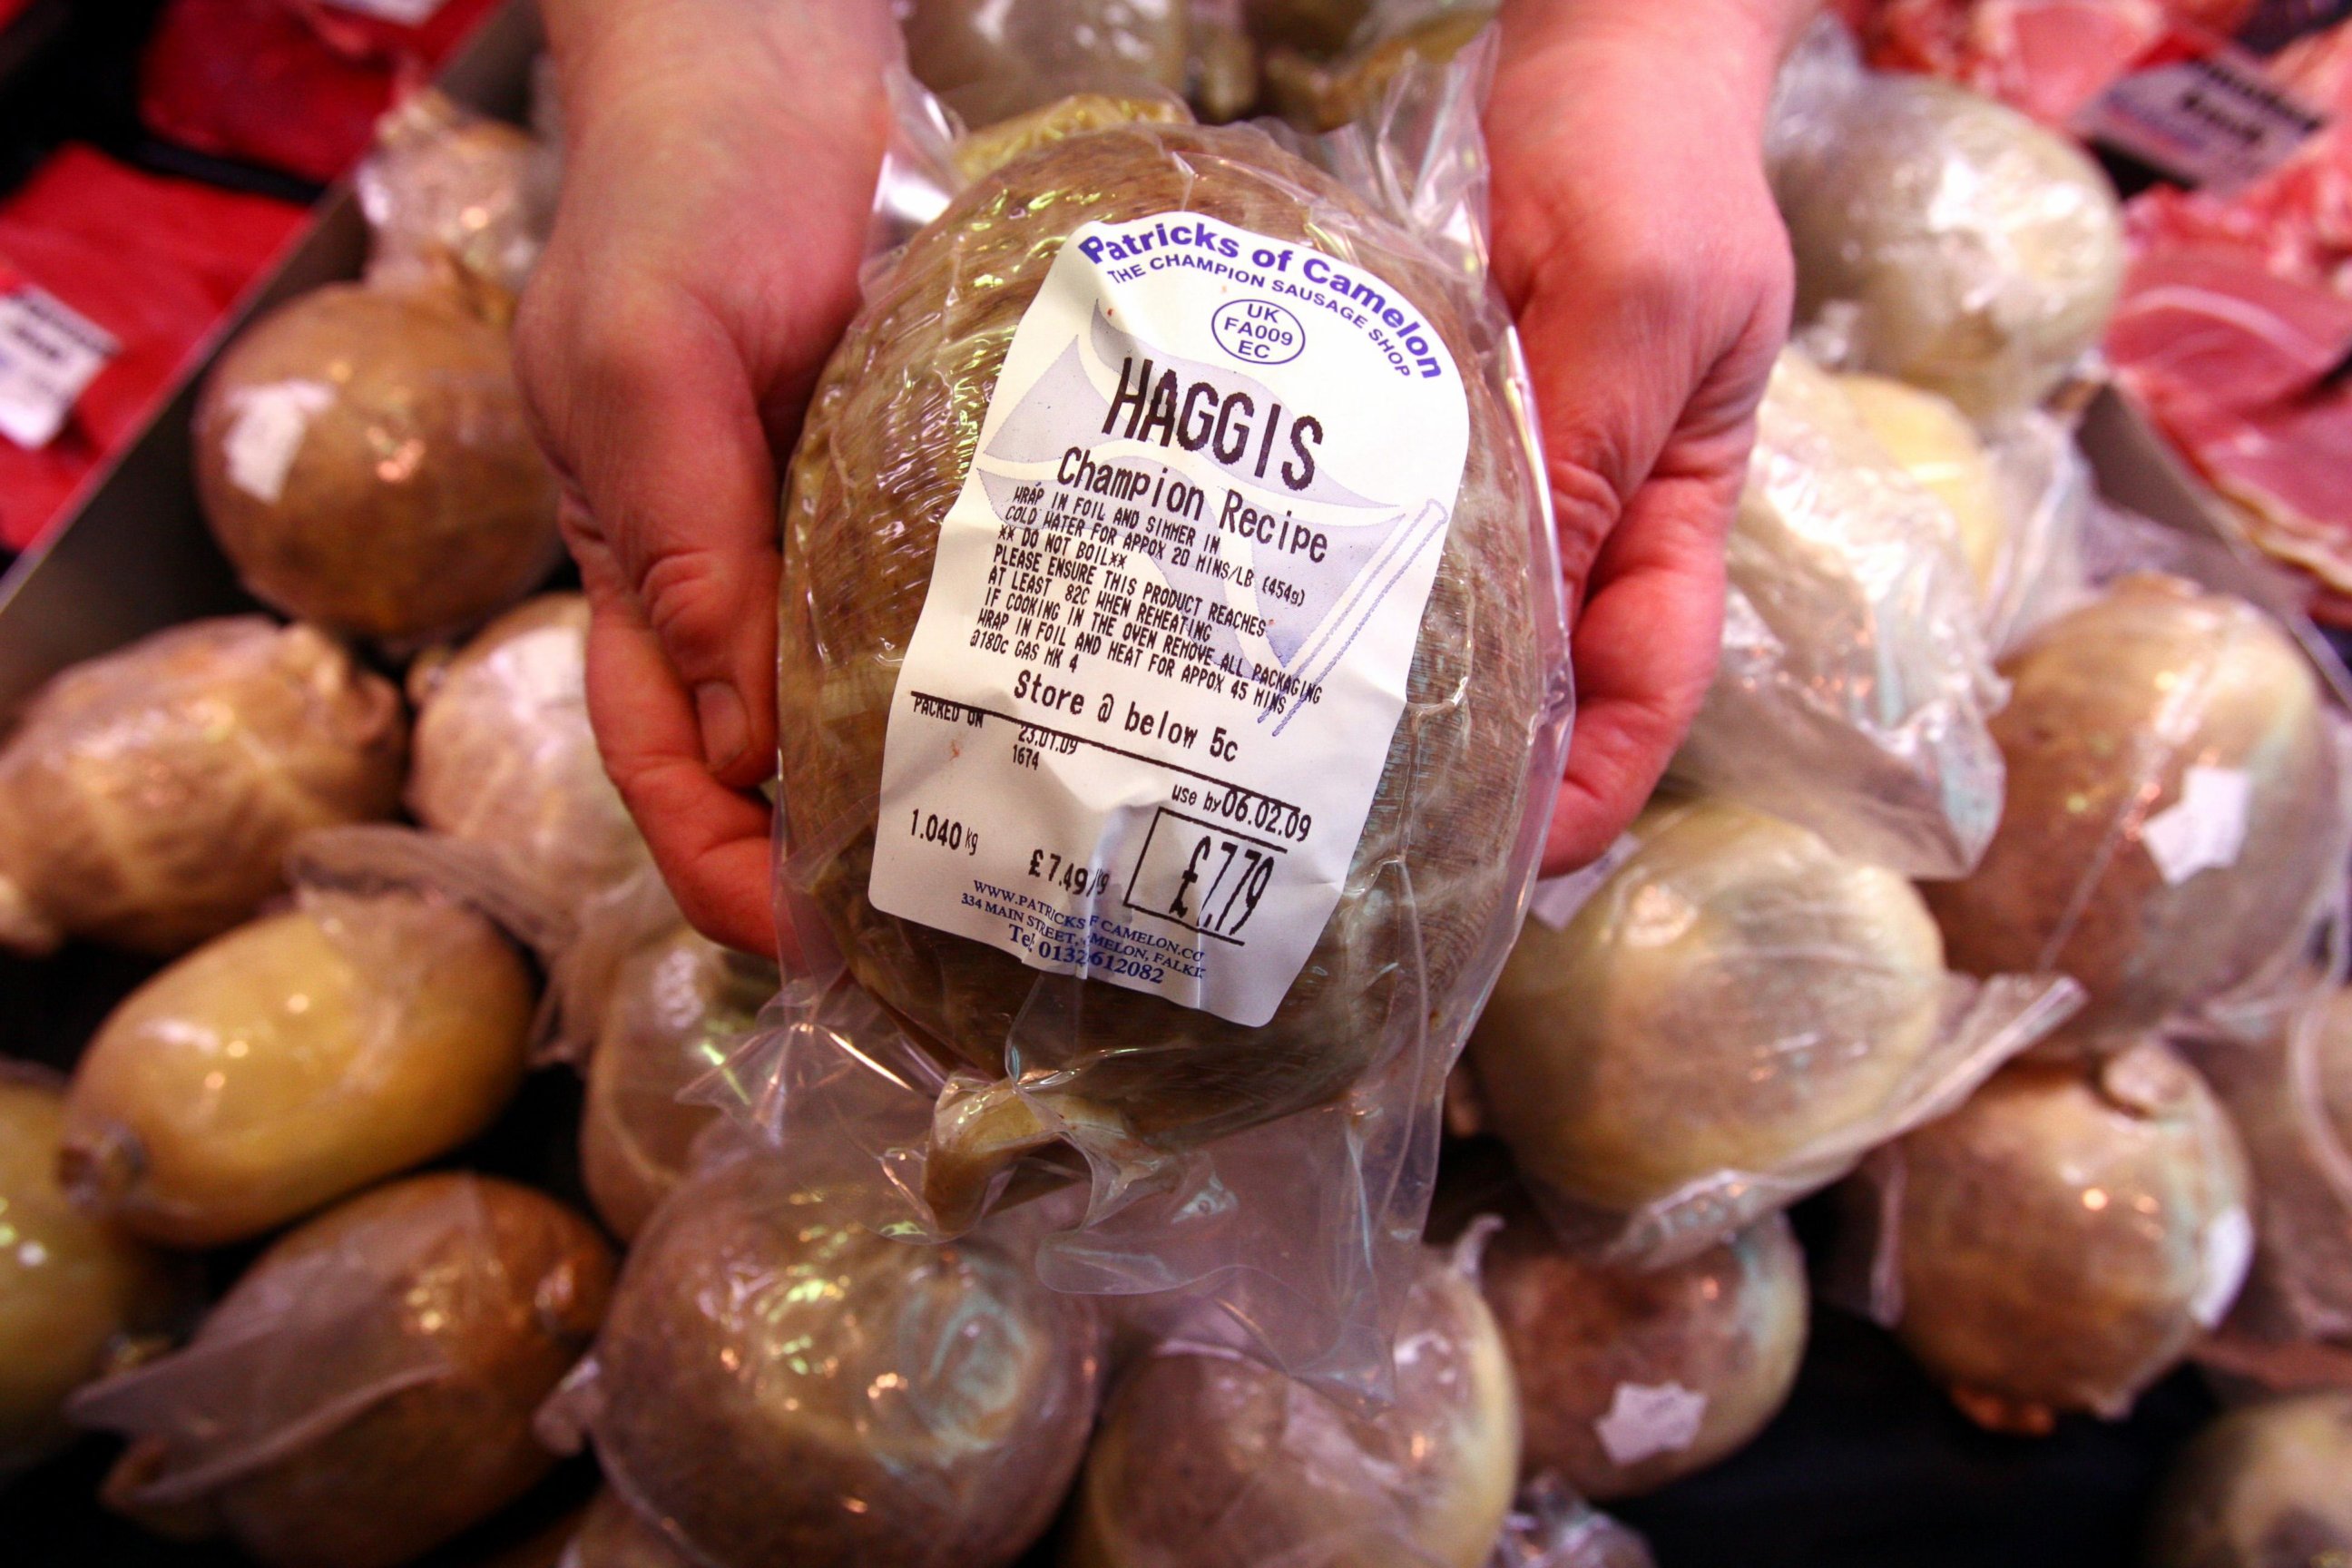 PHOTO: Haggis, a traditional Scottish food, on display before Burns Night celebrations in this Jan, 23, 2009 file photo.